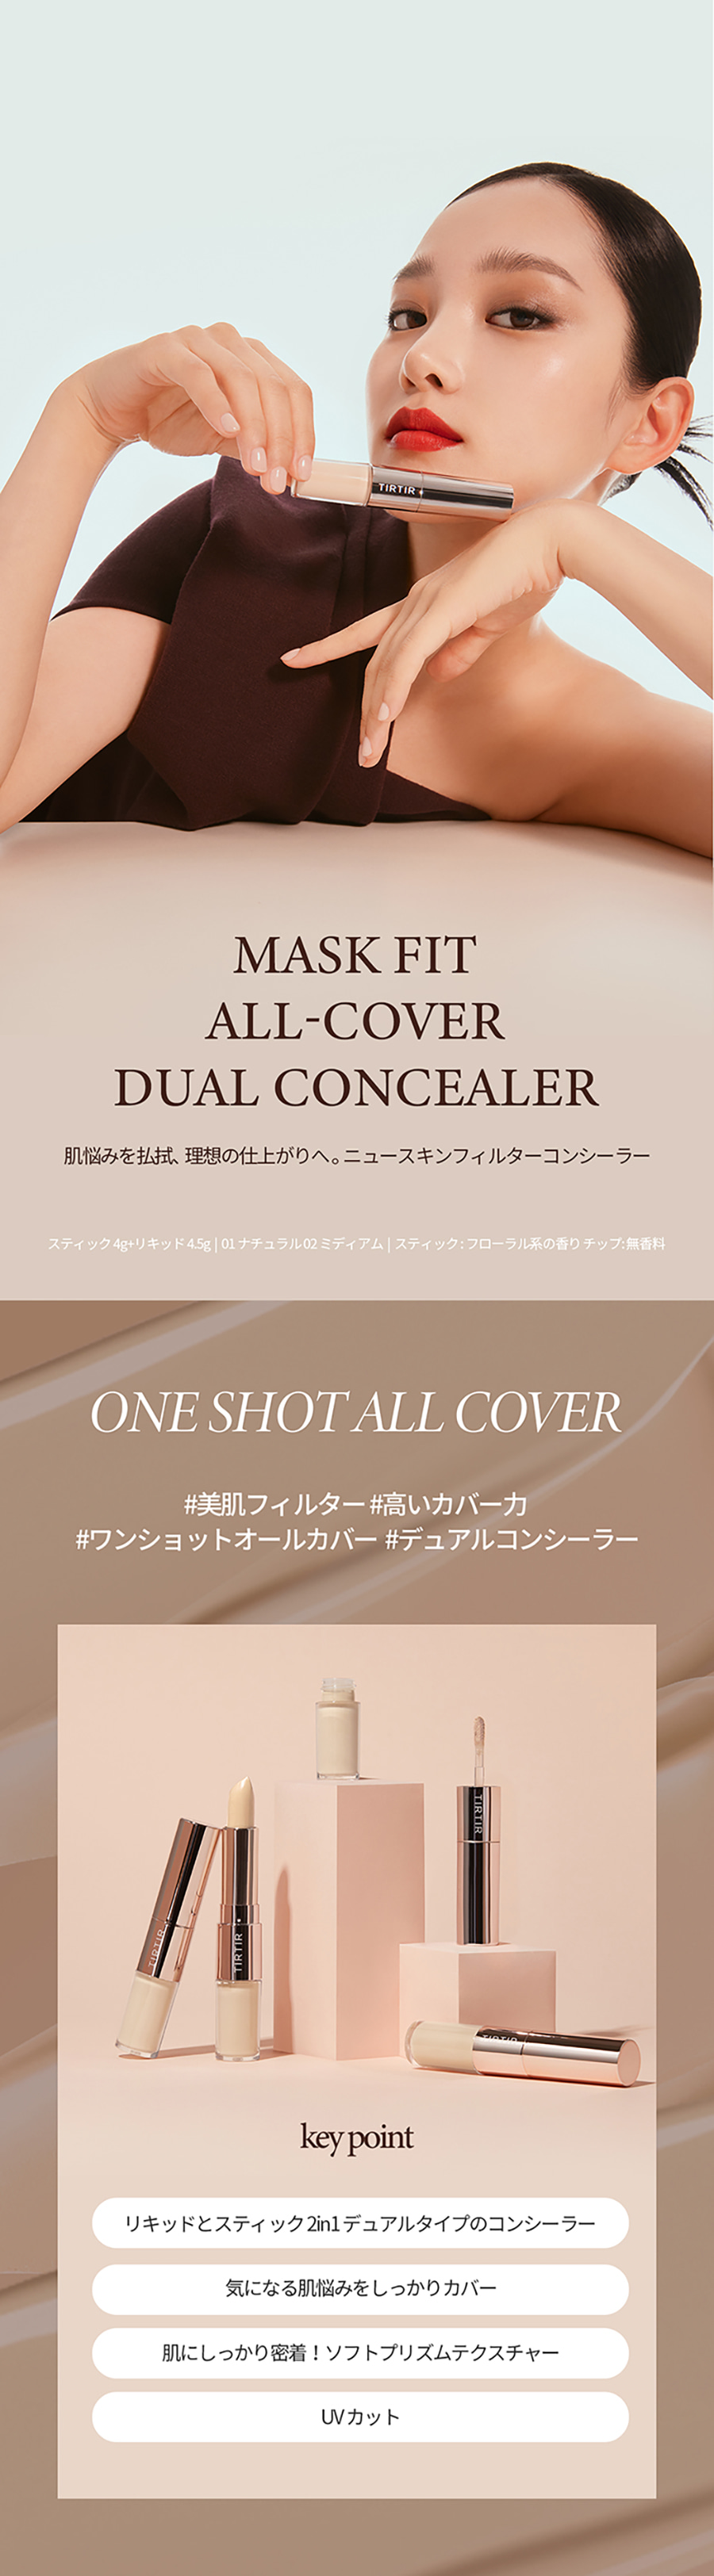 MASK FIT ALL-COVER DUAL CONCEALER - その他